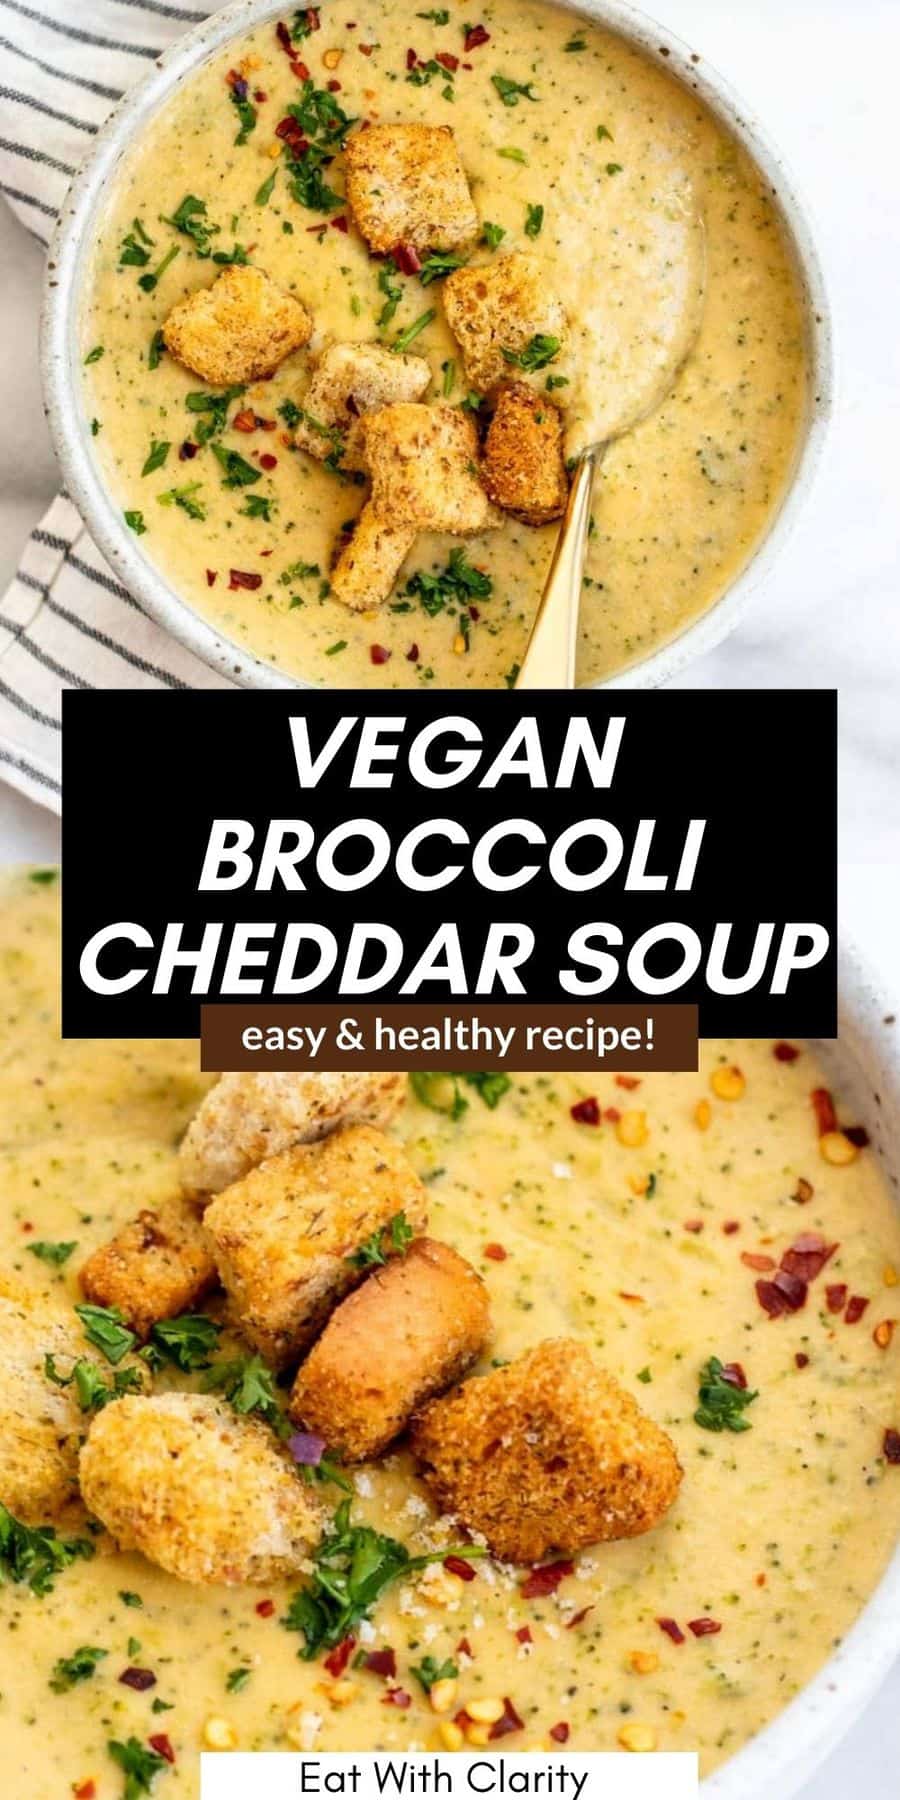 Vegan Broccoli Cheddar Soup | Eat With Clarity